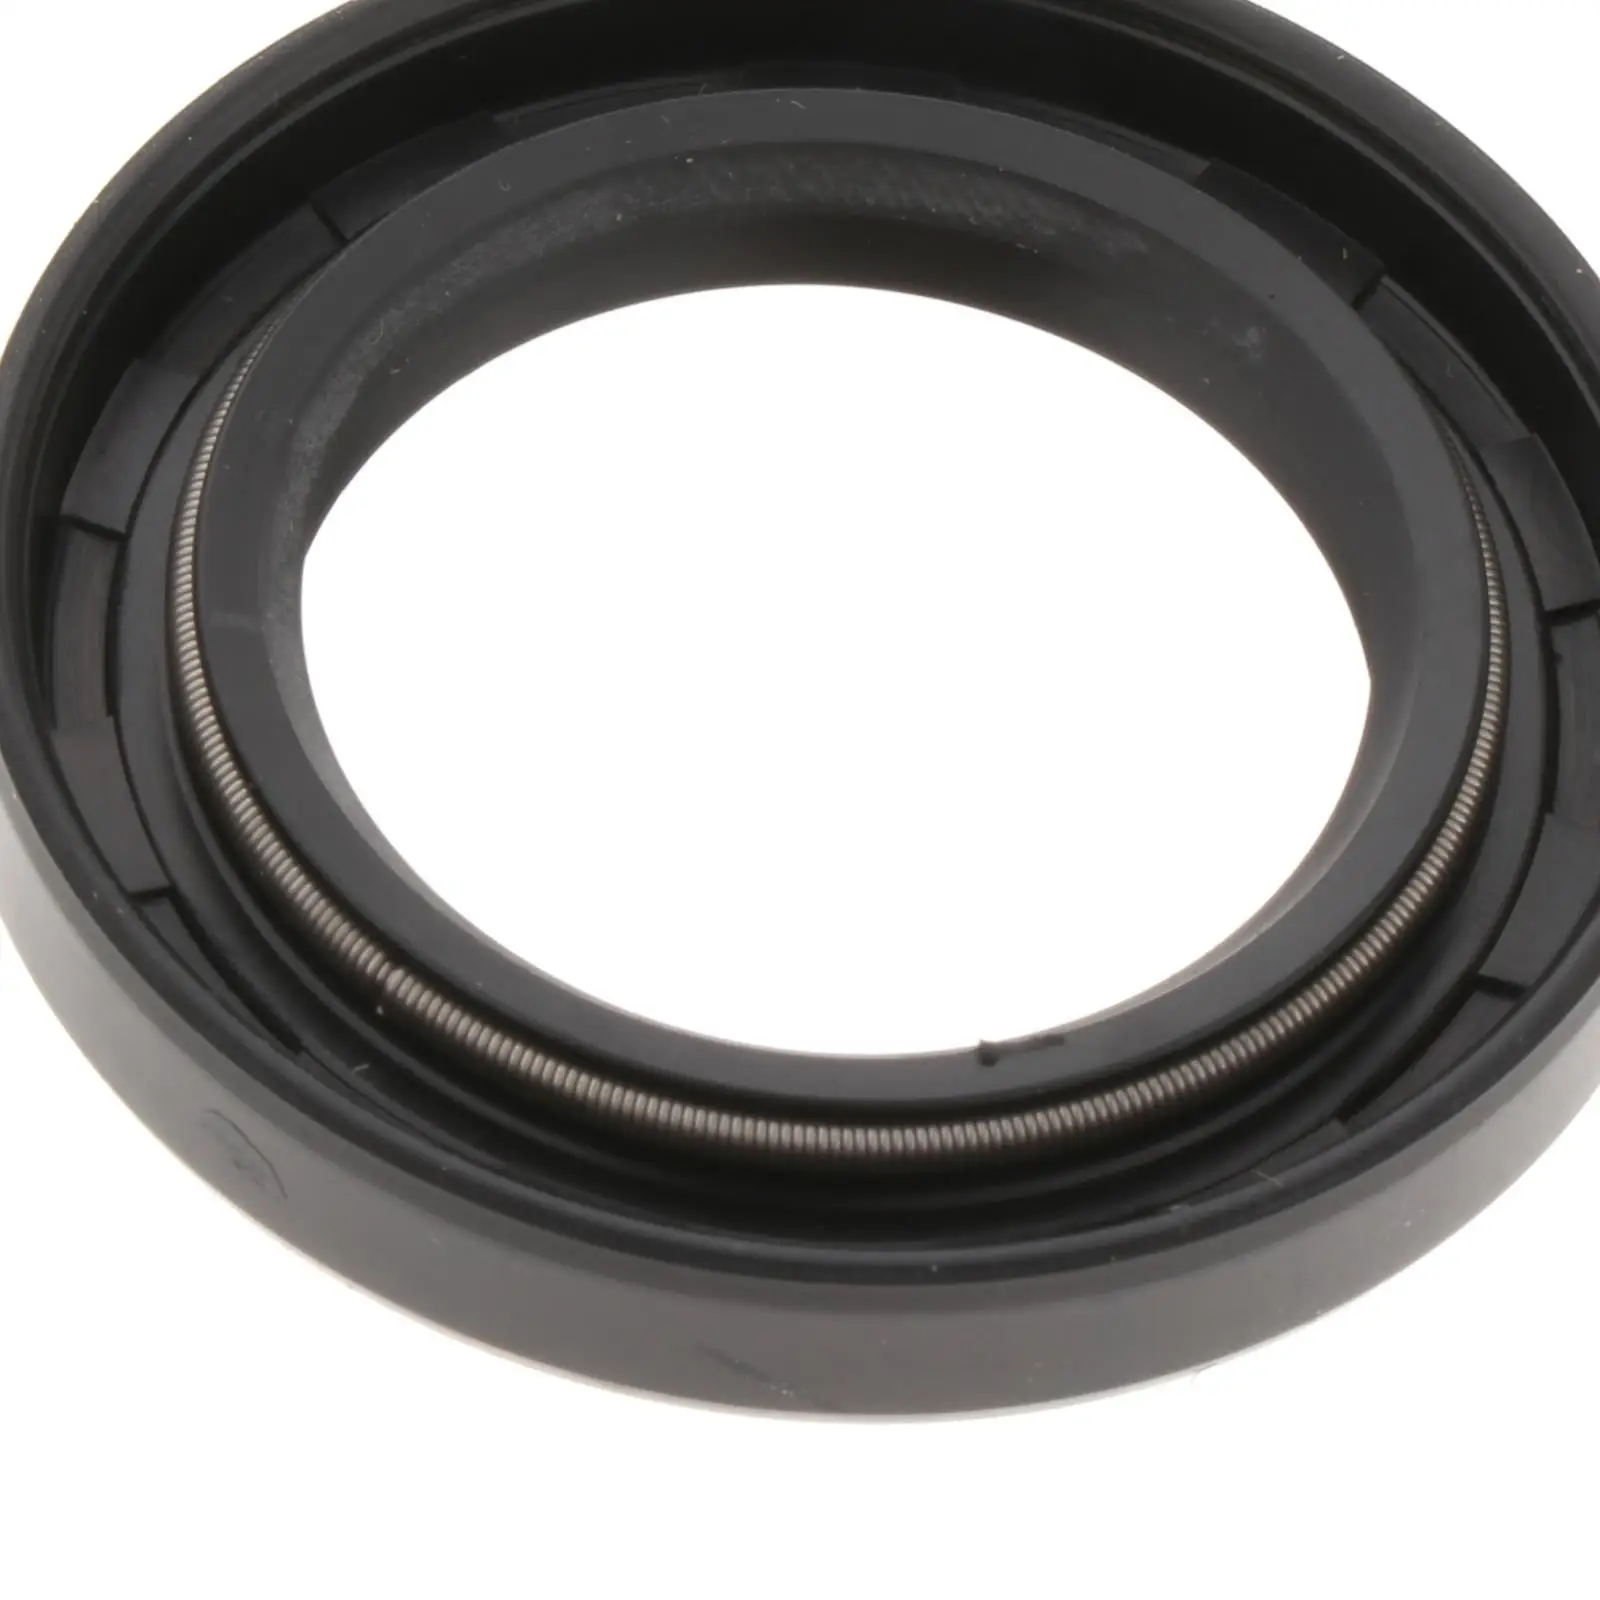 Oil Seal, 93102-30M23, for Yamaha Outboard Motor Durable Direct Replaces Easy to Install